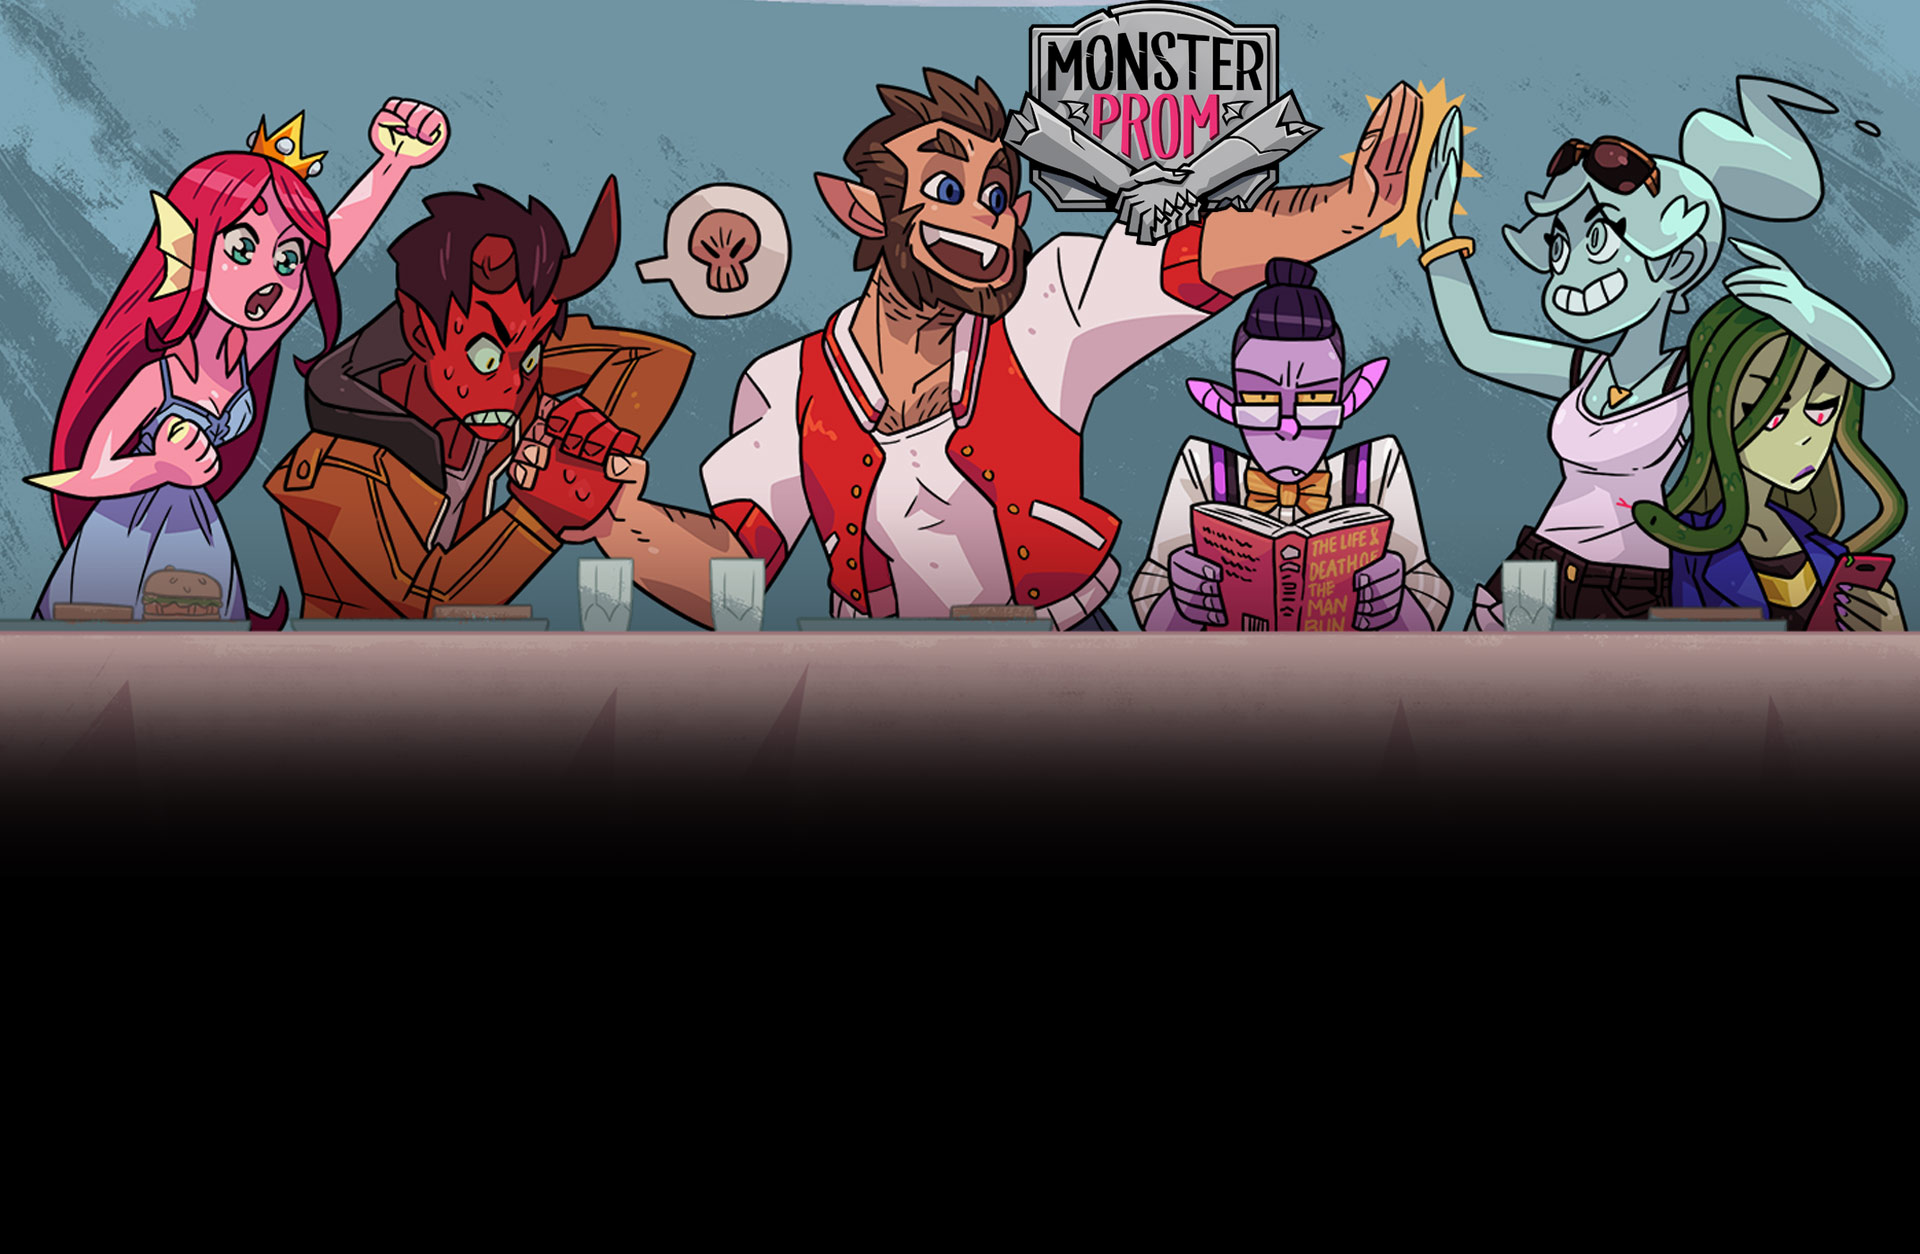 Monster Prom: First Crush Bundle